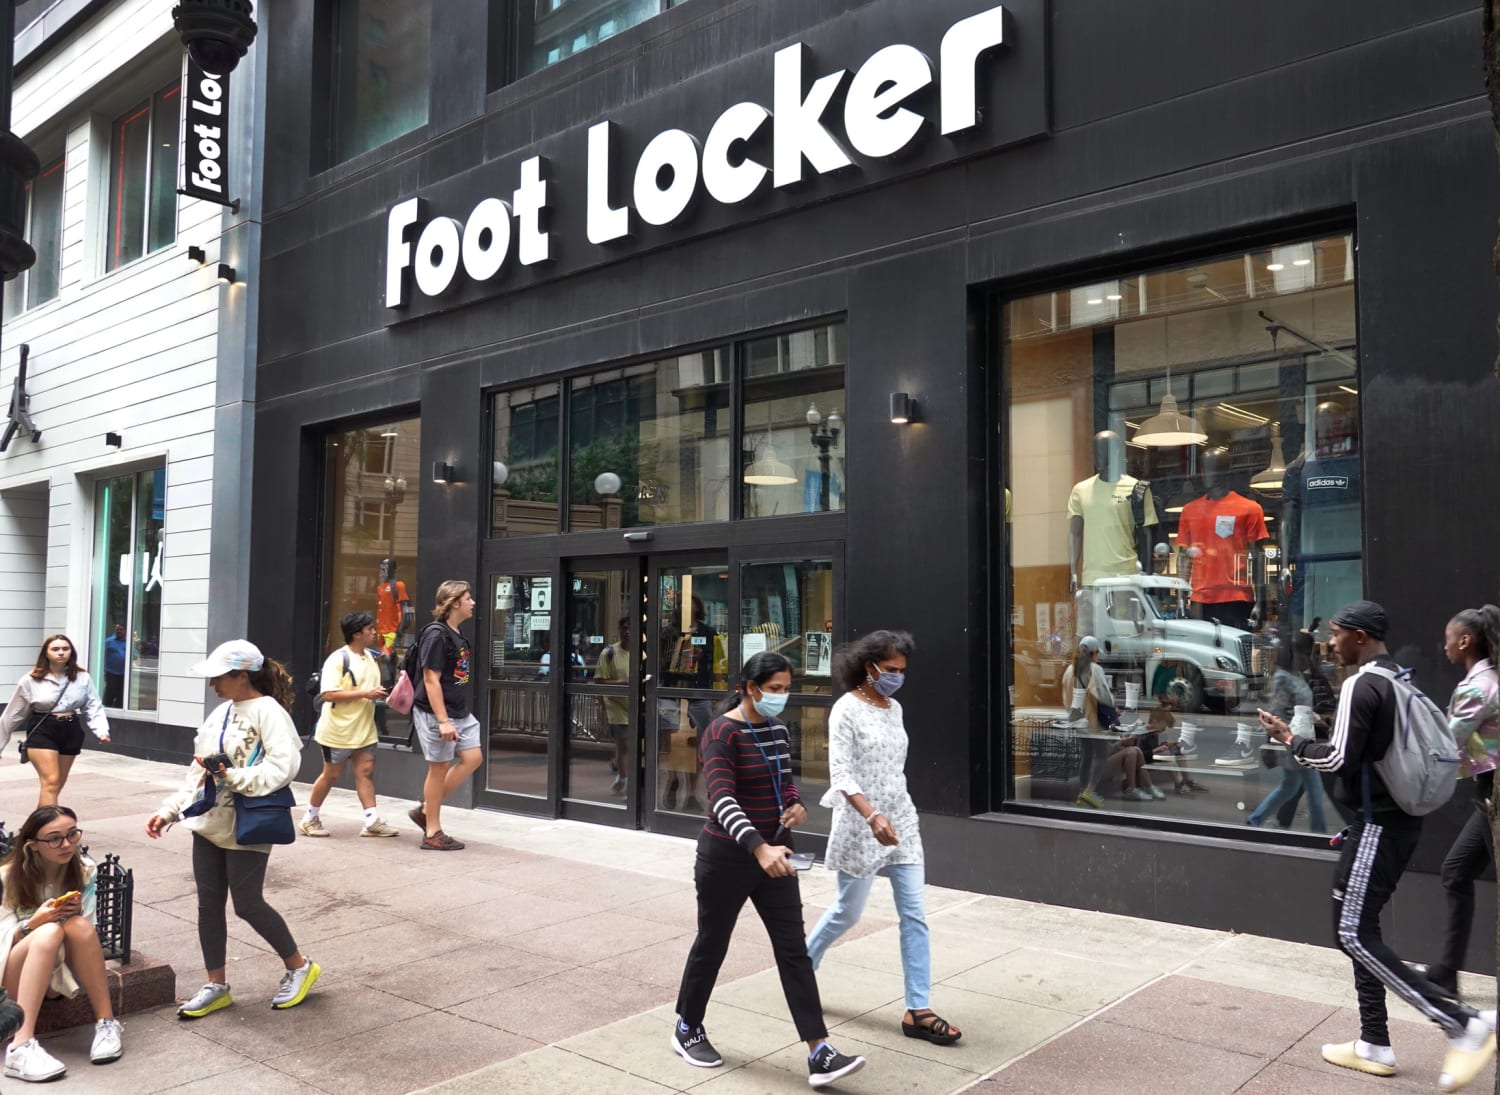 Foot Locker announces $54 million investment to support the Black community